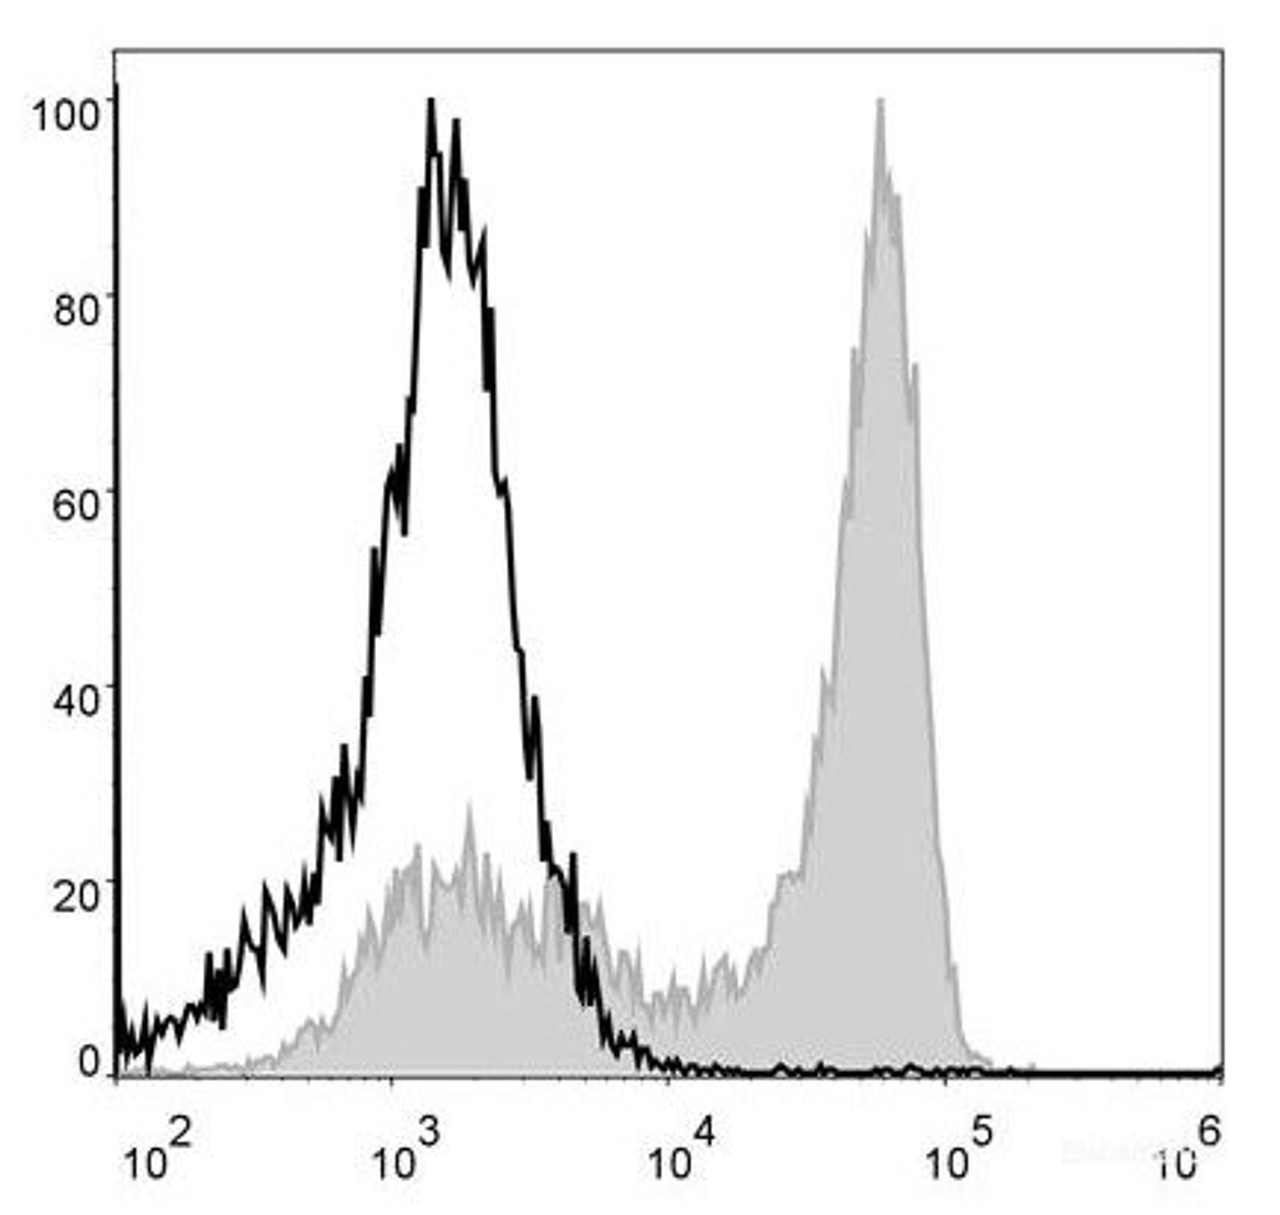 Mouse bone marrow cells are stained with PerCP Anti-Mouse Ly6G Antibody(filled gray histogram). Unstained bone marrow cells (blank black histogram) are used as control.